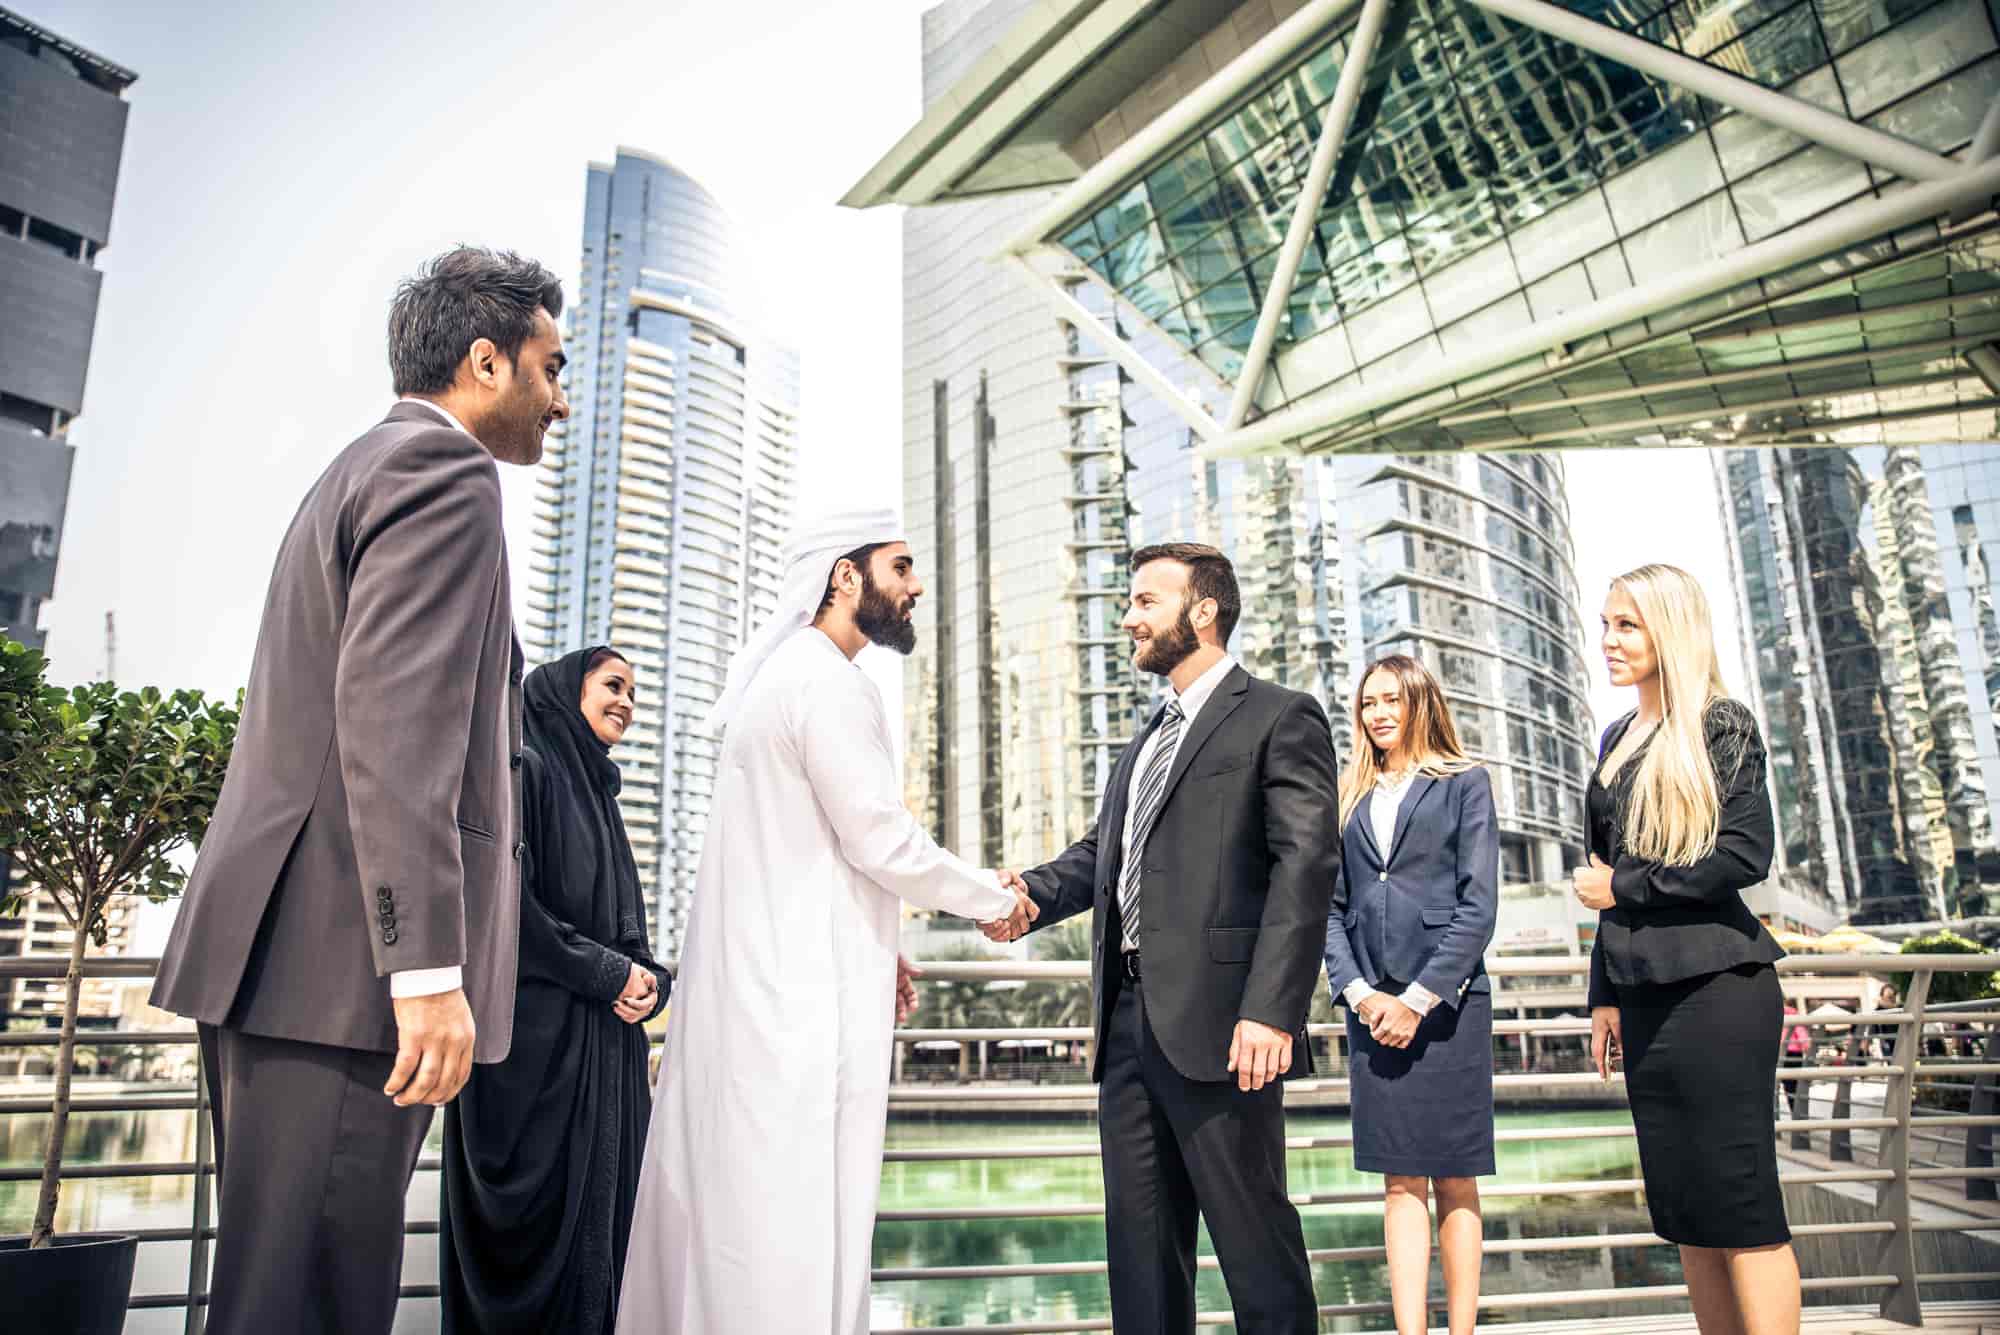 FOUR BOOMING UAE INDUSTRIES TO WATCH IN 2021